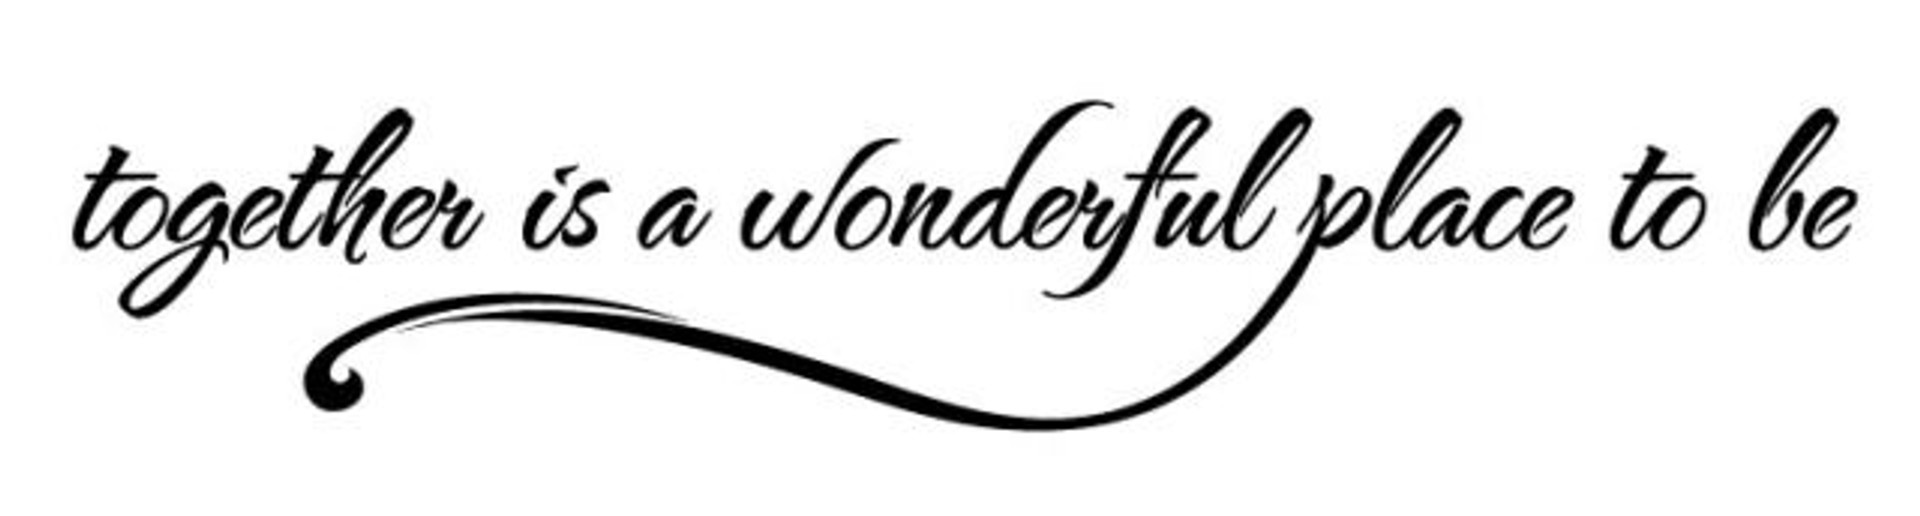 A Wonderful Place To Be Wall Decal | DecalMyWall.com